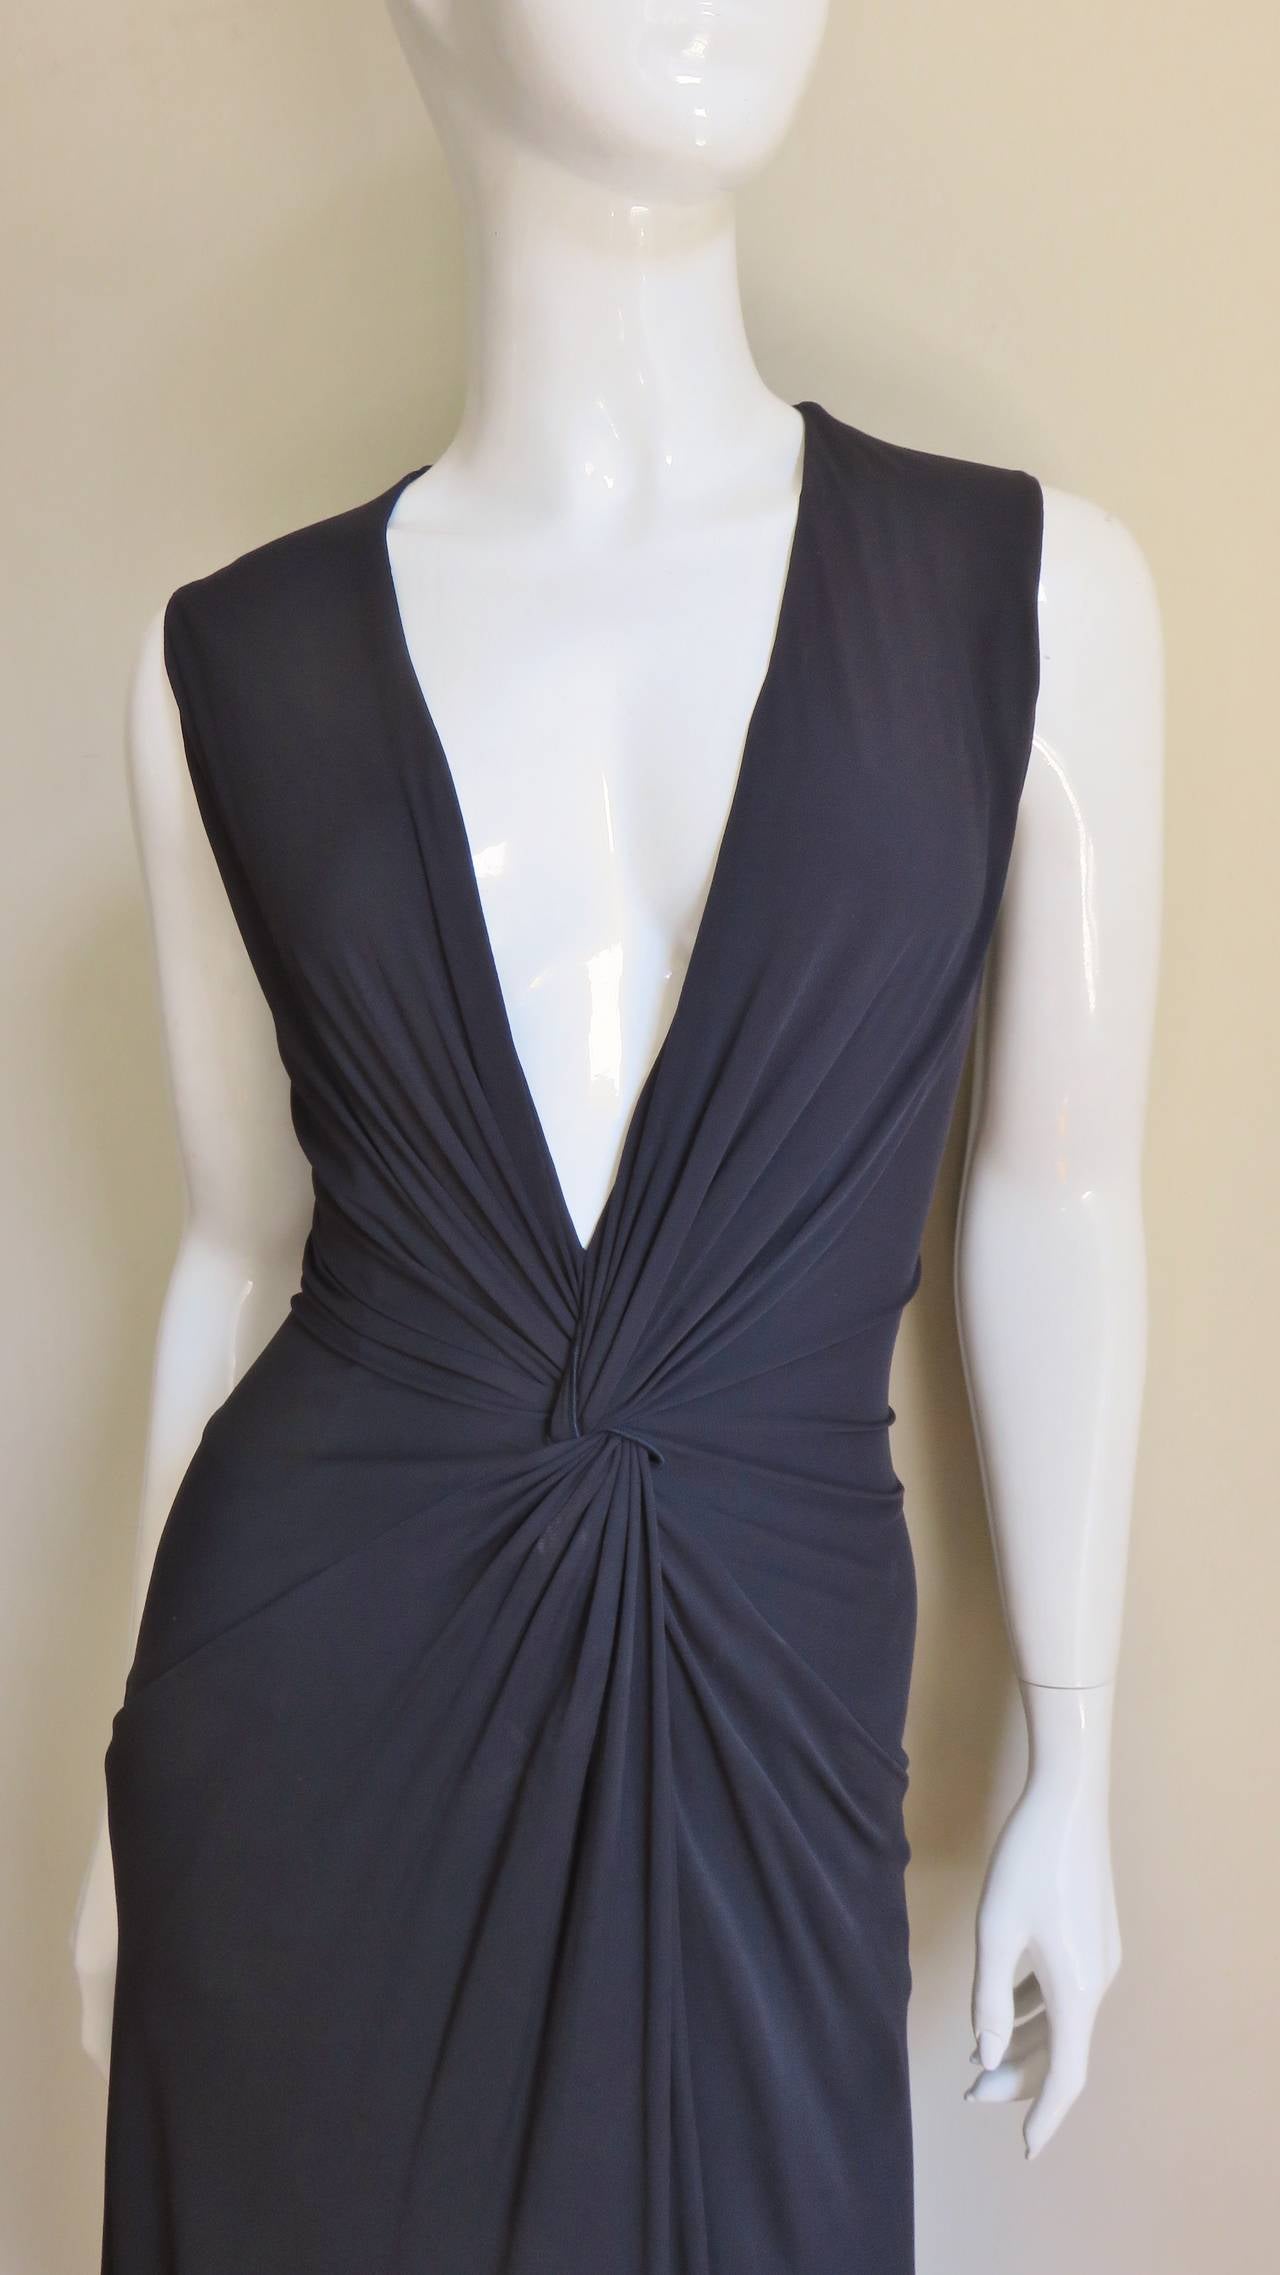 A fabulous rich fine black jersey dress from Alexander McQueen.  Very flattering with a deep plunging neckline and gathering meeting at the center front waist.  Built into the design in the gathers at a seam to the hip lies a pocket on either side. 